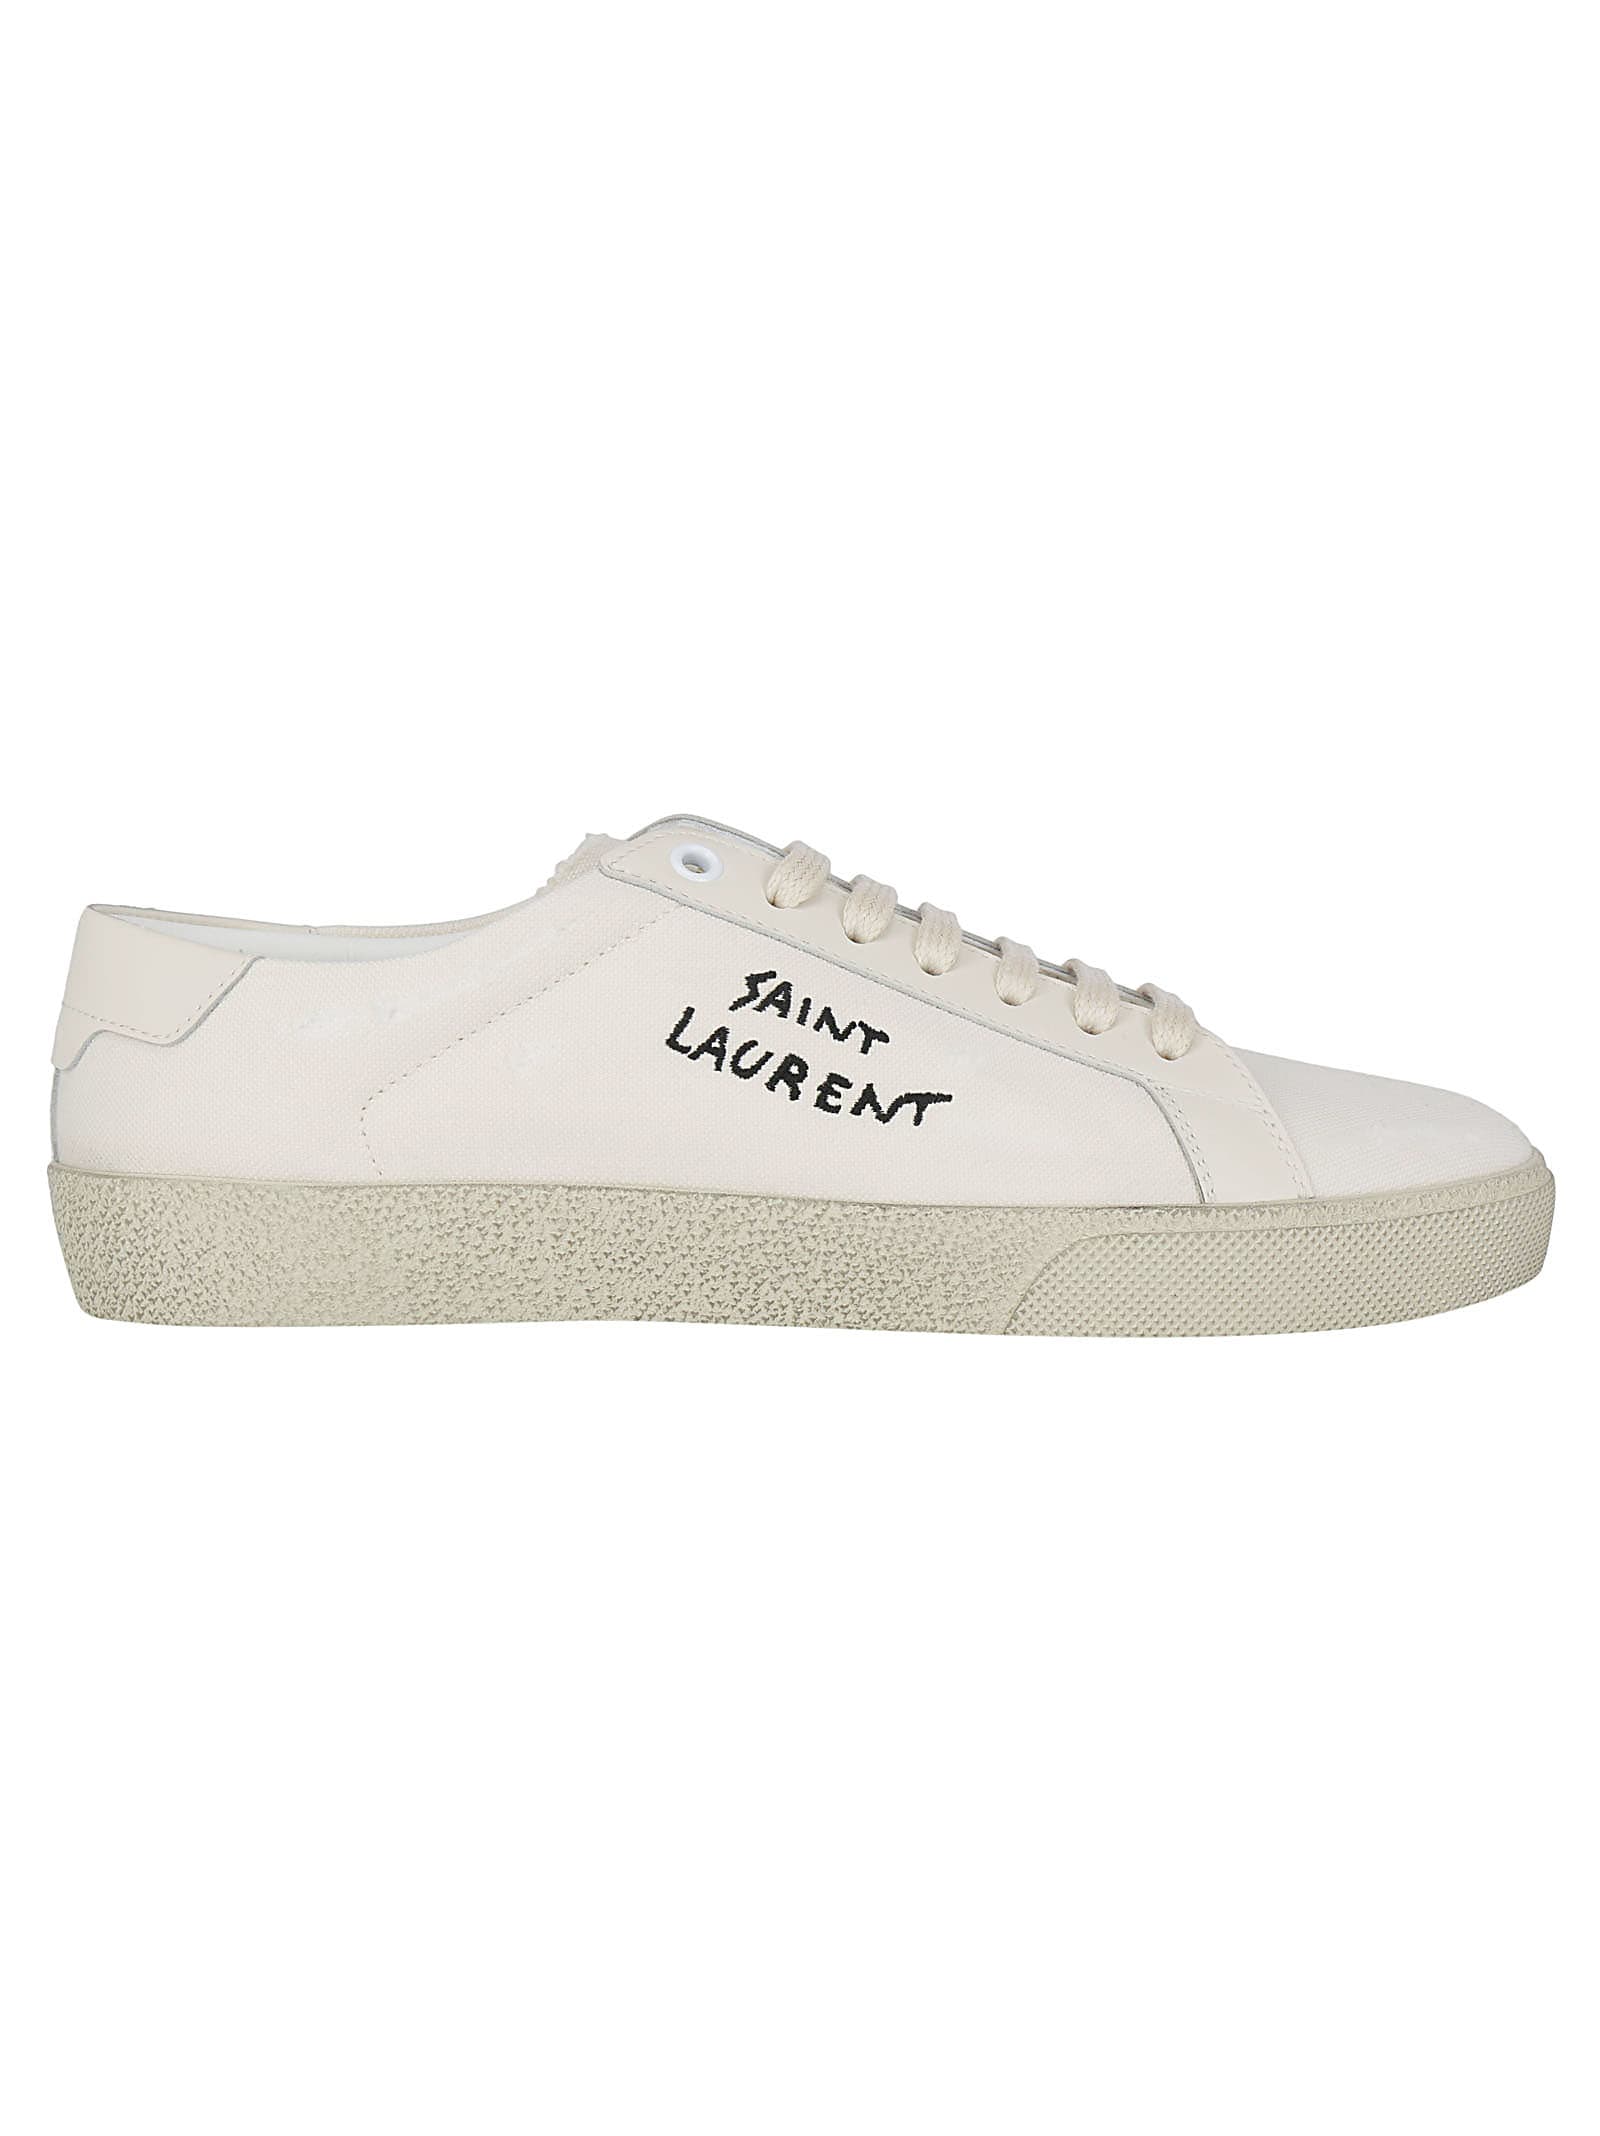 saint laurent embroidered sneakers